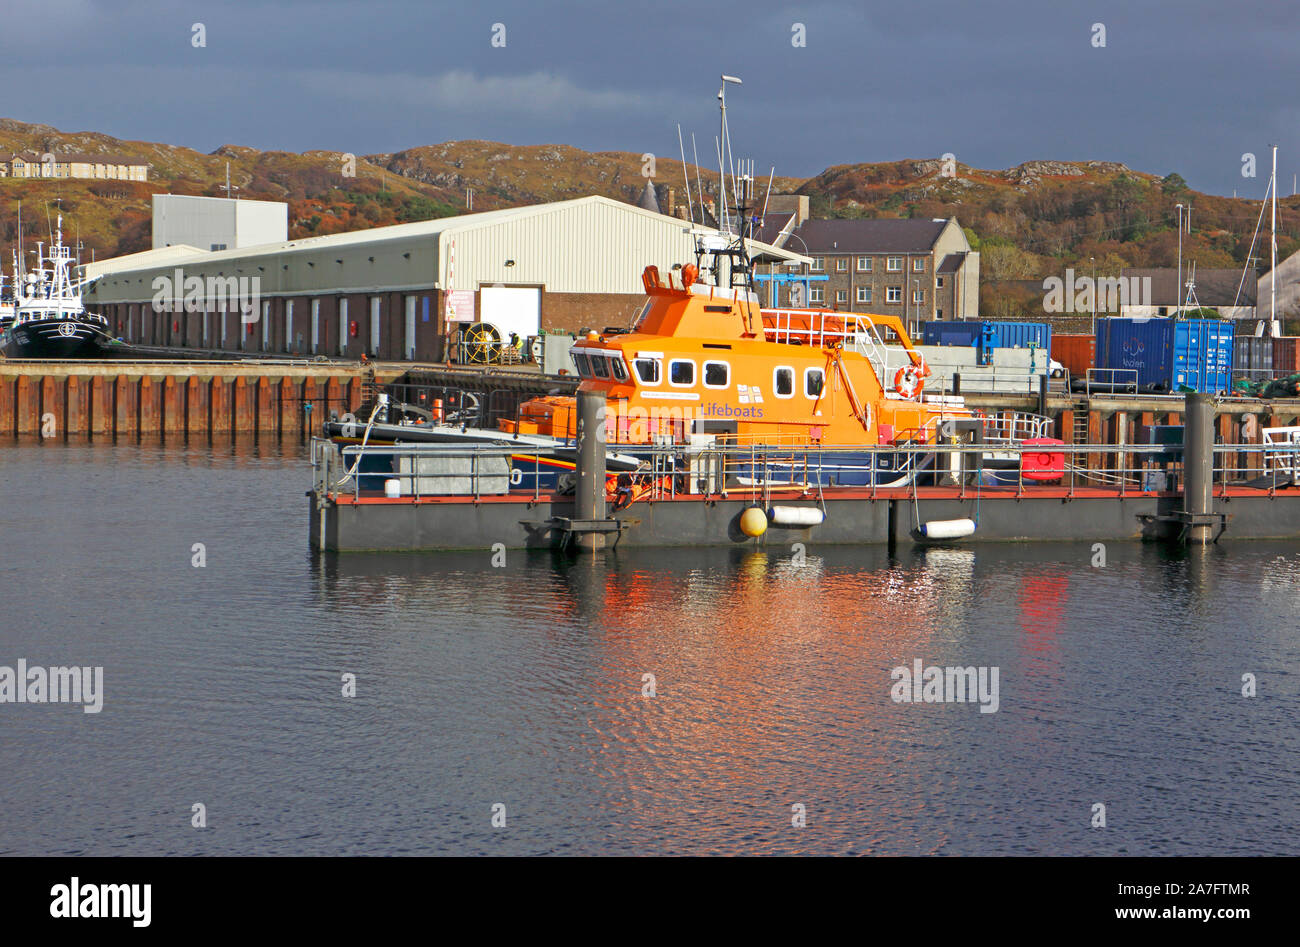 A view of the Severn class all-weather lifeboat at berth in Lochinver, Assynt, Sutherland, Scotland, United Kingdom, Europe. Stock Photo